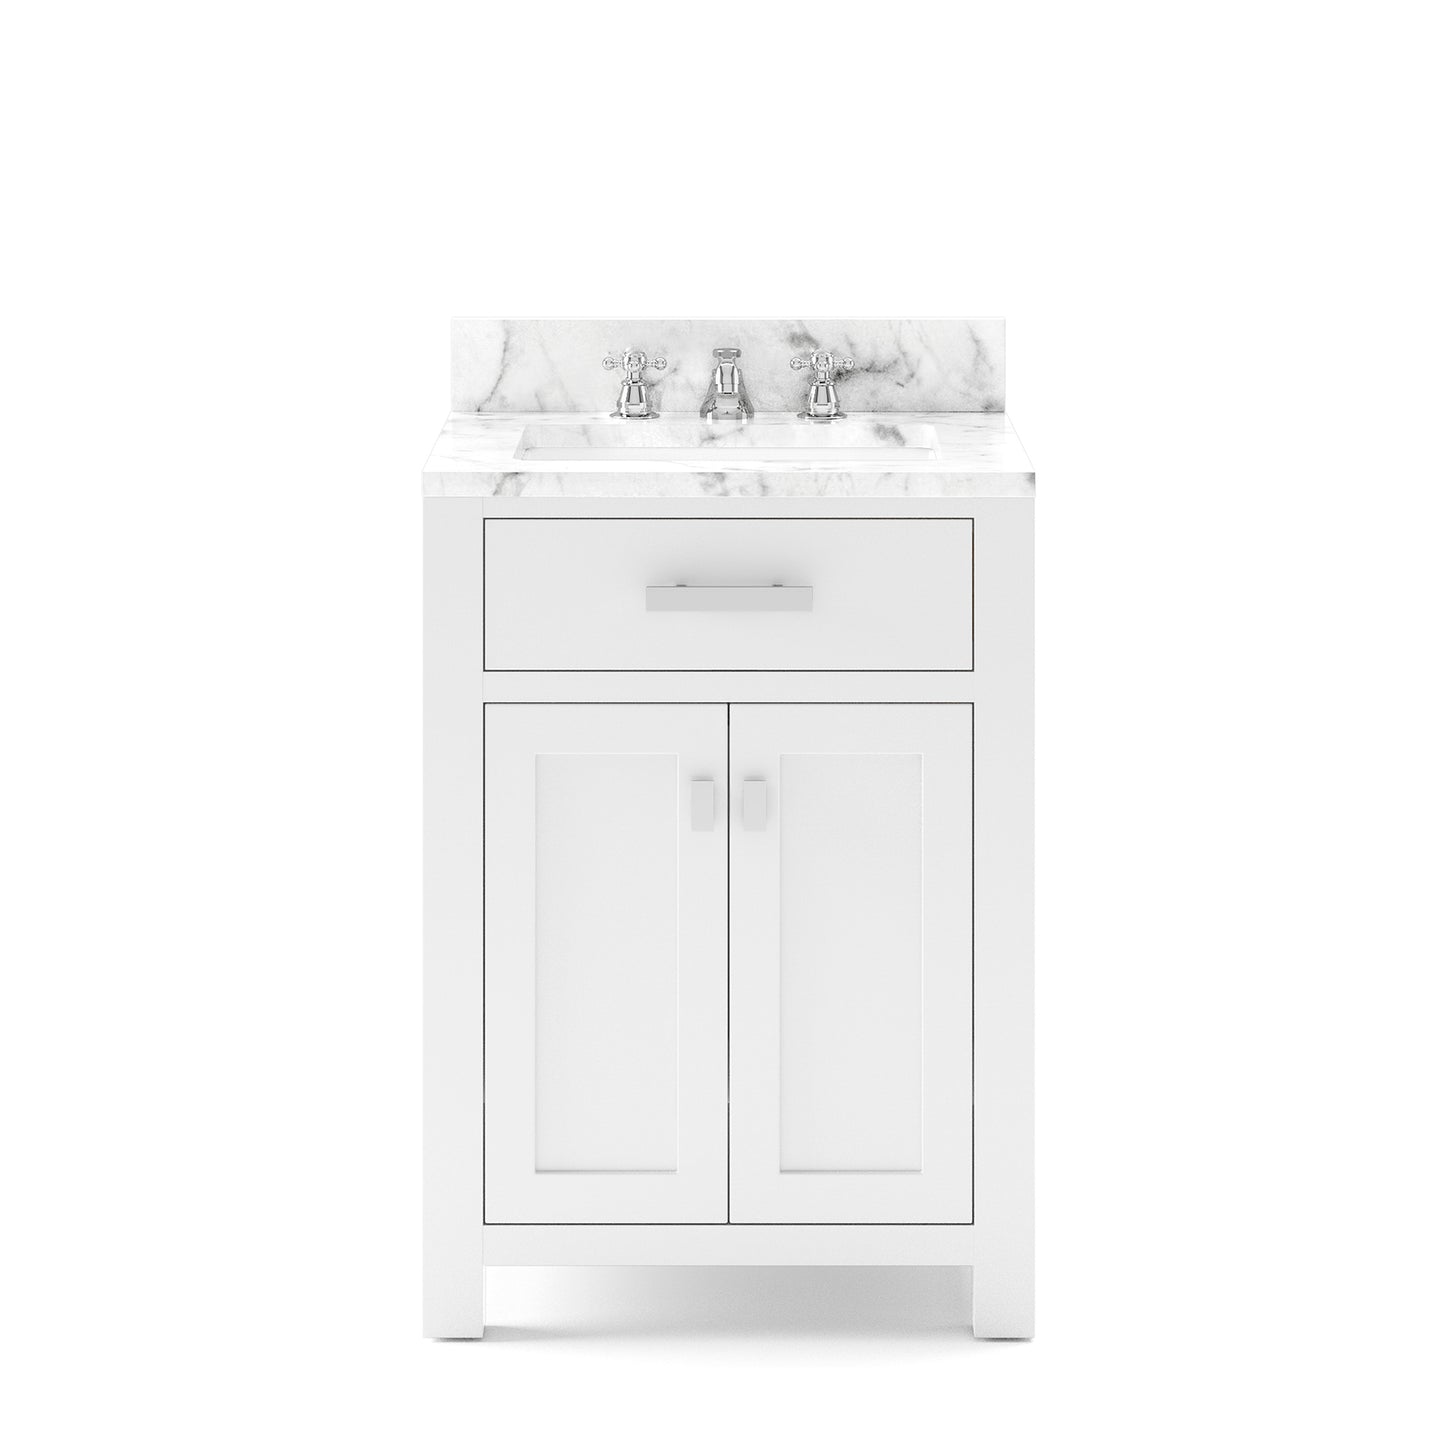 MADISON 24"W x 34"H Pure White Single-Sink Vanity + Faucets